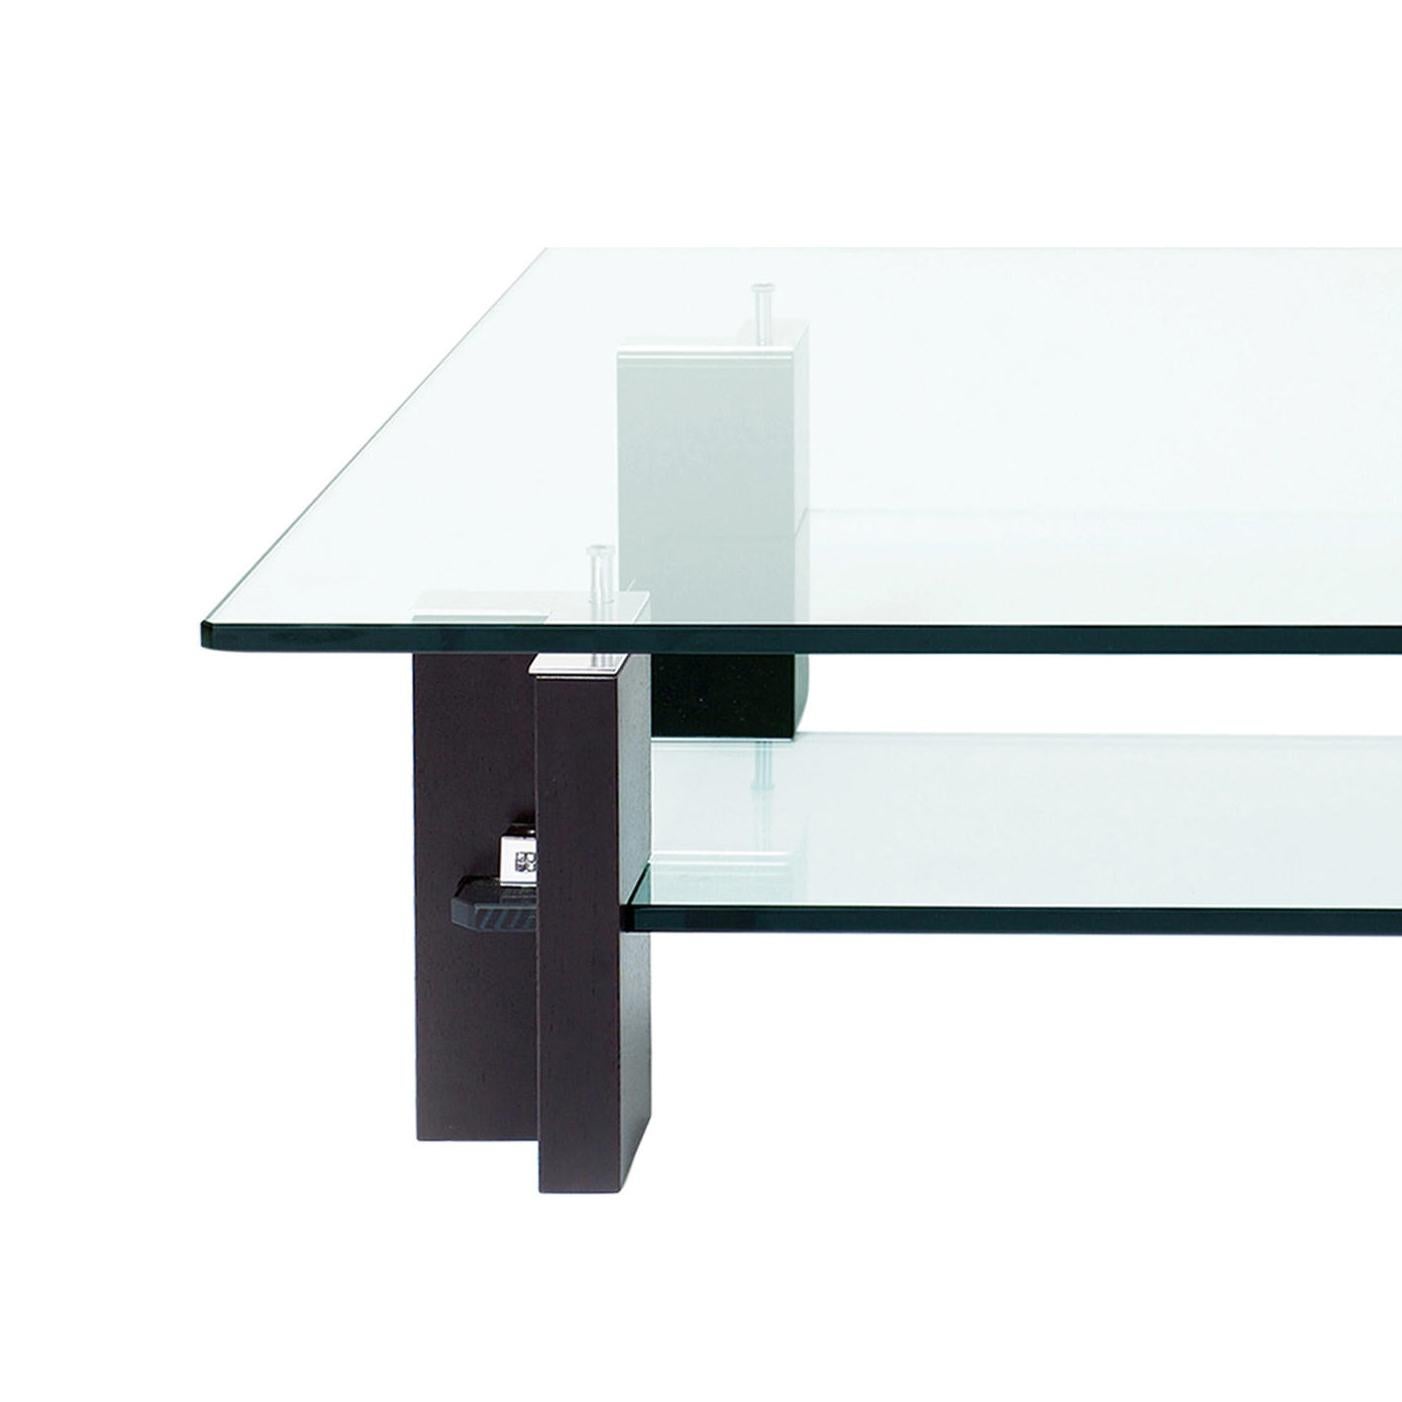 Designed by Peter Ghyczy 2001.
Manufactured by Ghyczy (Netherlands)

Architectural aesthetics build the main element of this coffee table. A strong base made of tempered glass and wood radiates stability while yet again the top glass plate seems